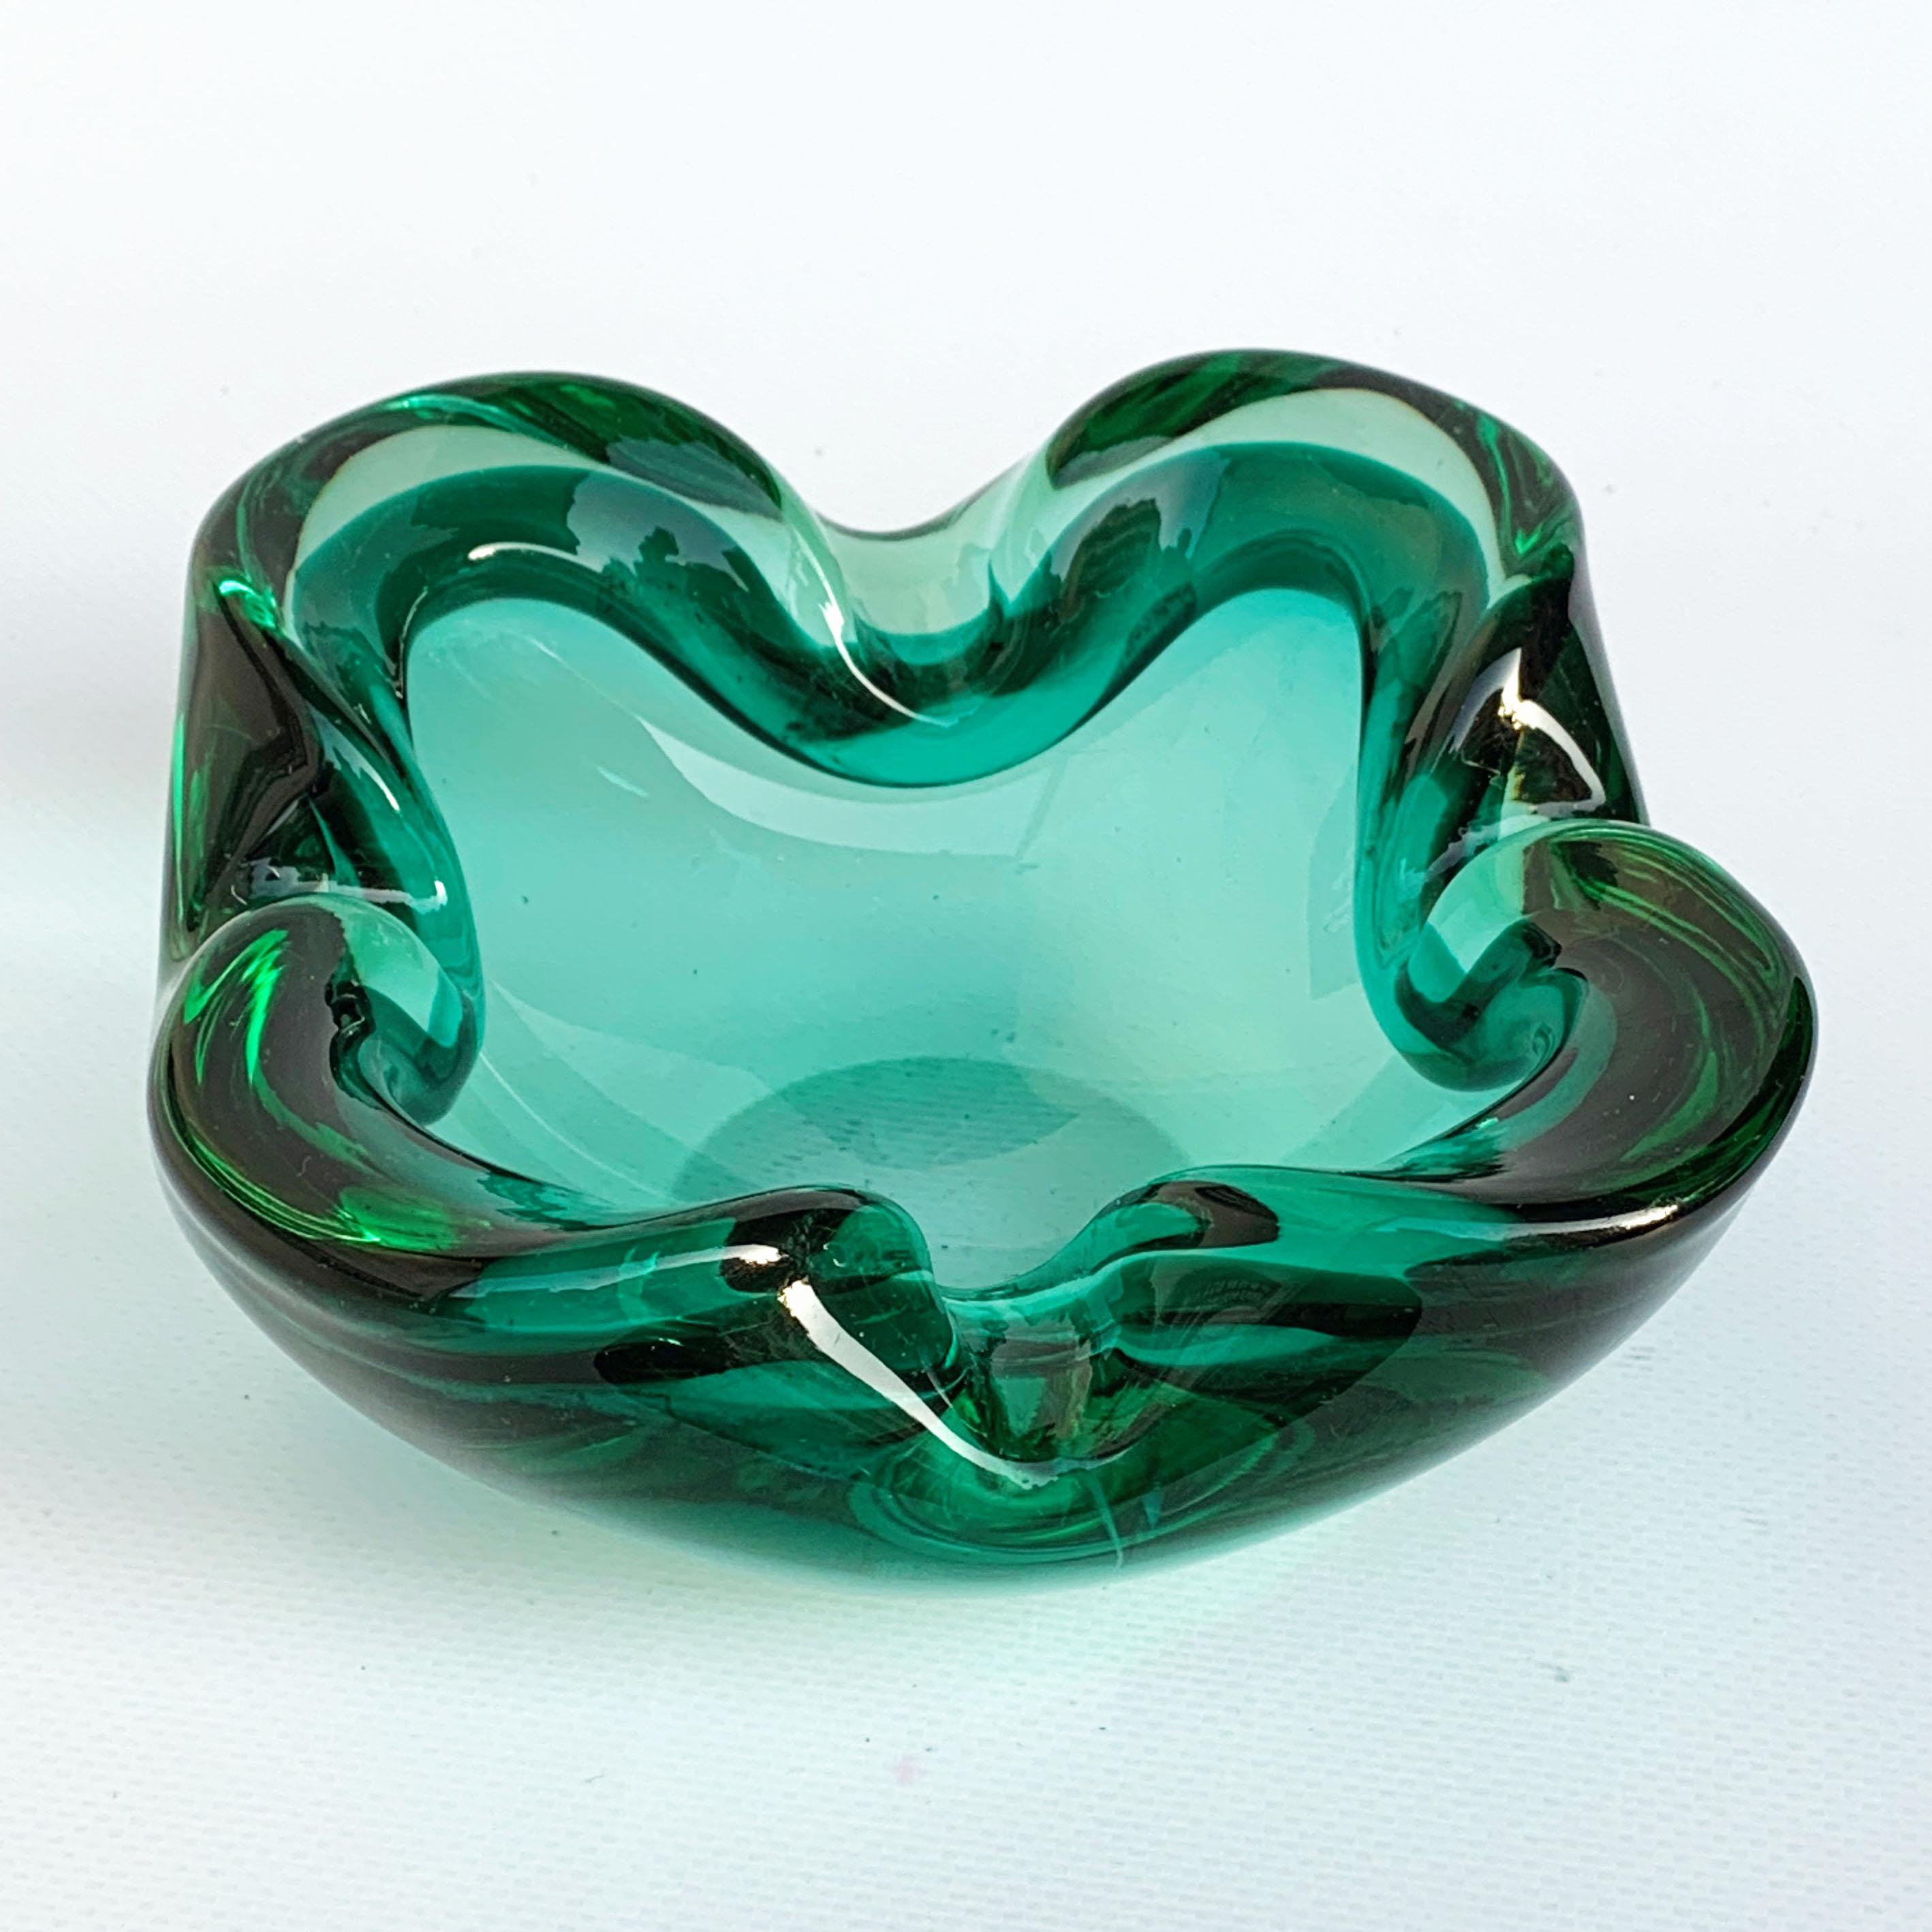 Wonderful midcentury Sommerso Murano green Glass Decorative Bowl or ashtray. This magnificent piece was produced in Italy during 1960s.

This item is in fantastic vintage conditions as it has no chipping and would be a fantastic centrepiece on a